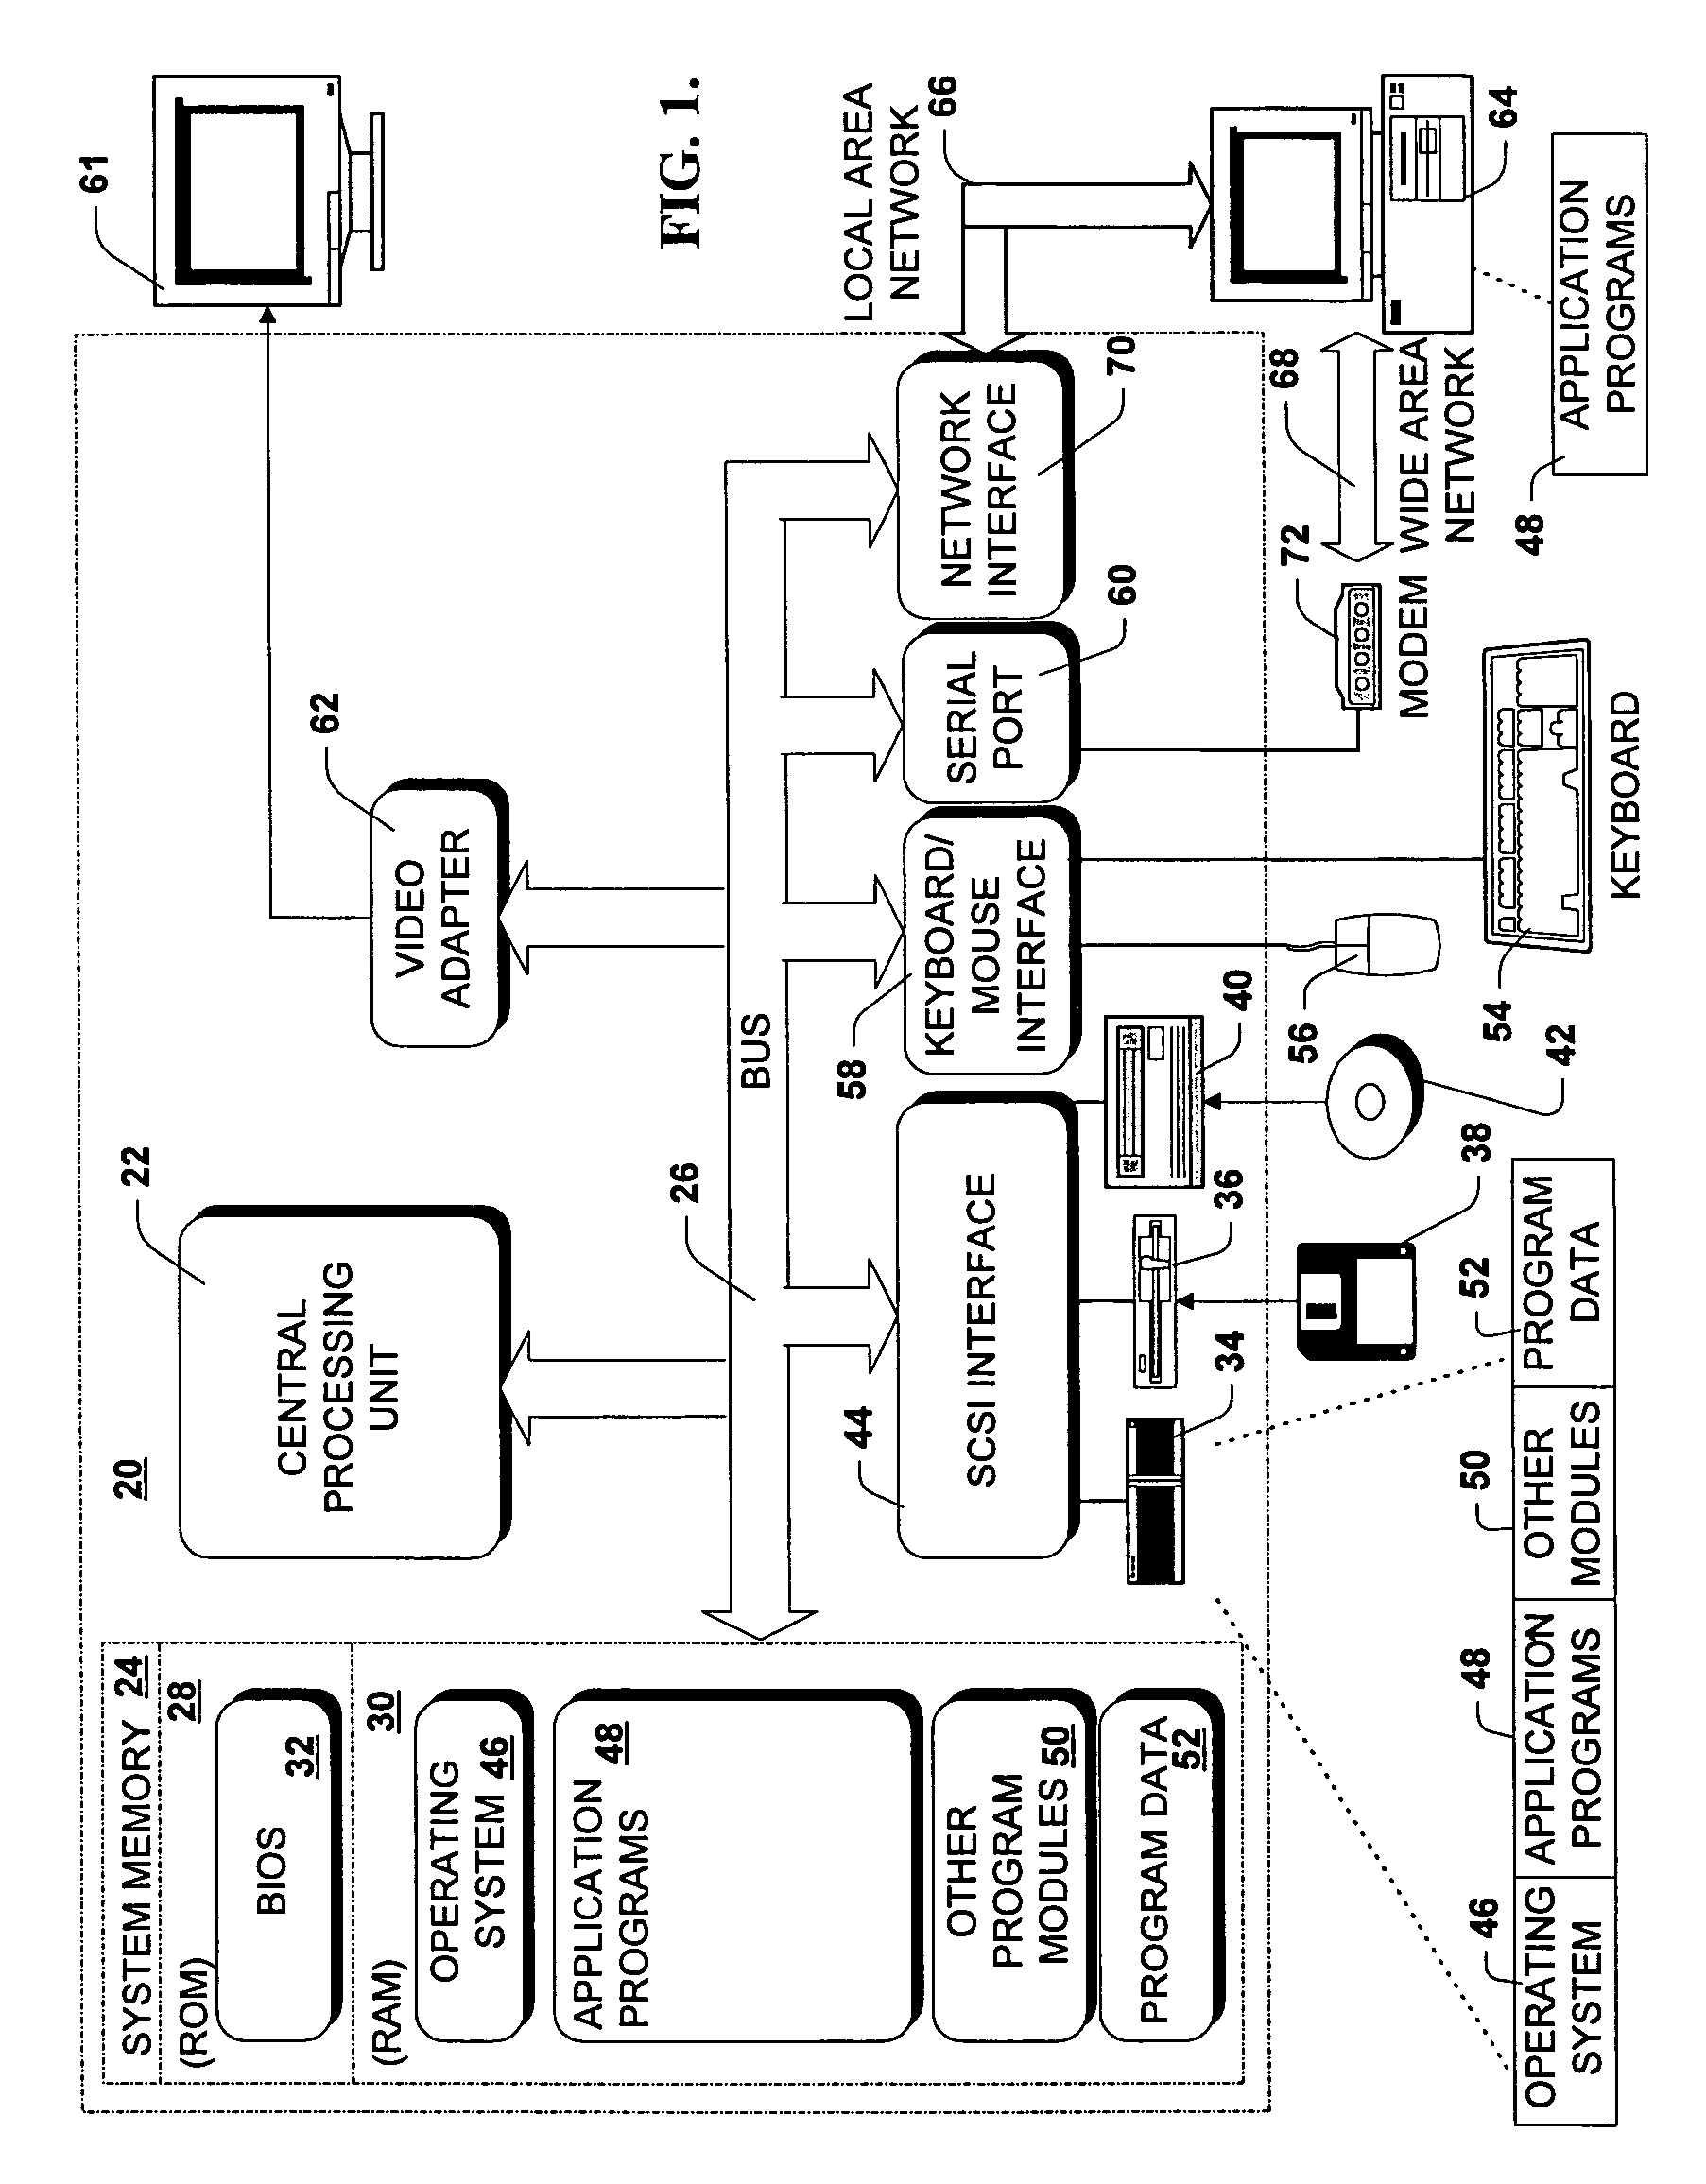 System and method for service chain management in a client management tool